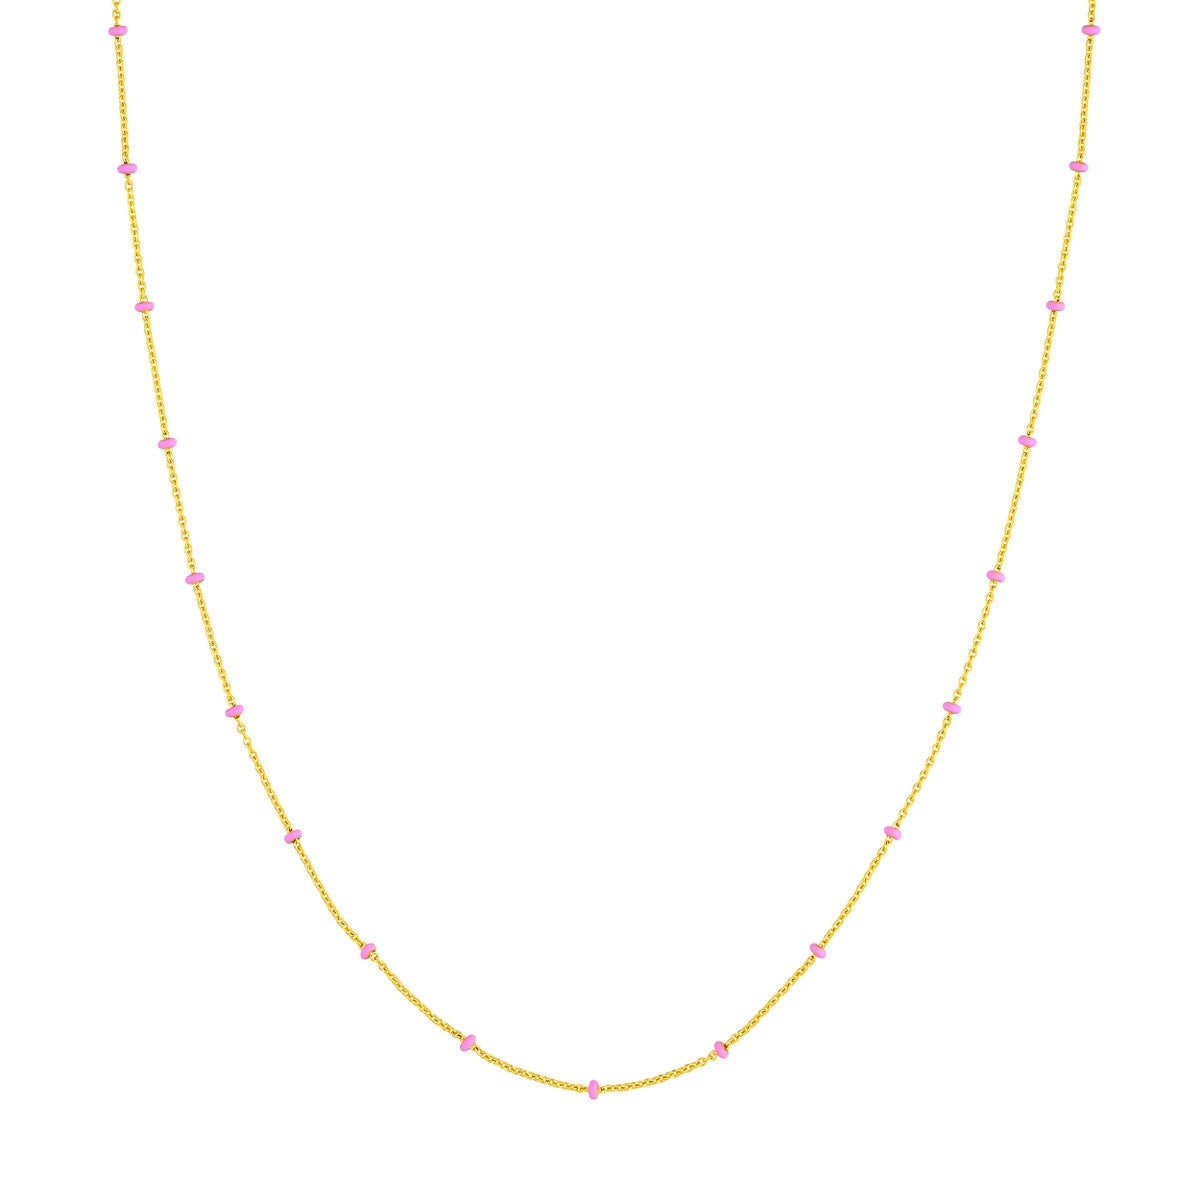 14K GOLD ROLO CHAIN WITH PINK ENAMEL BEADS